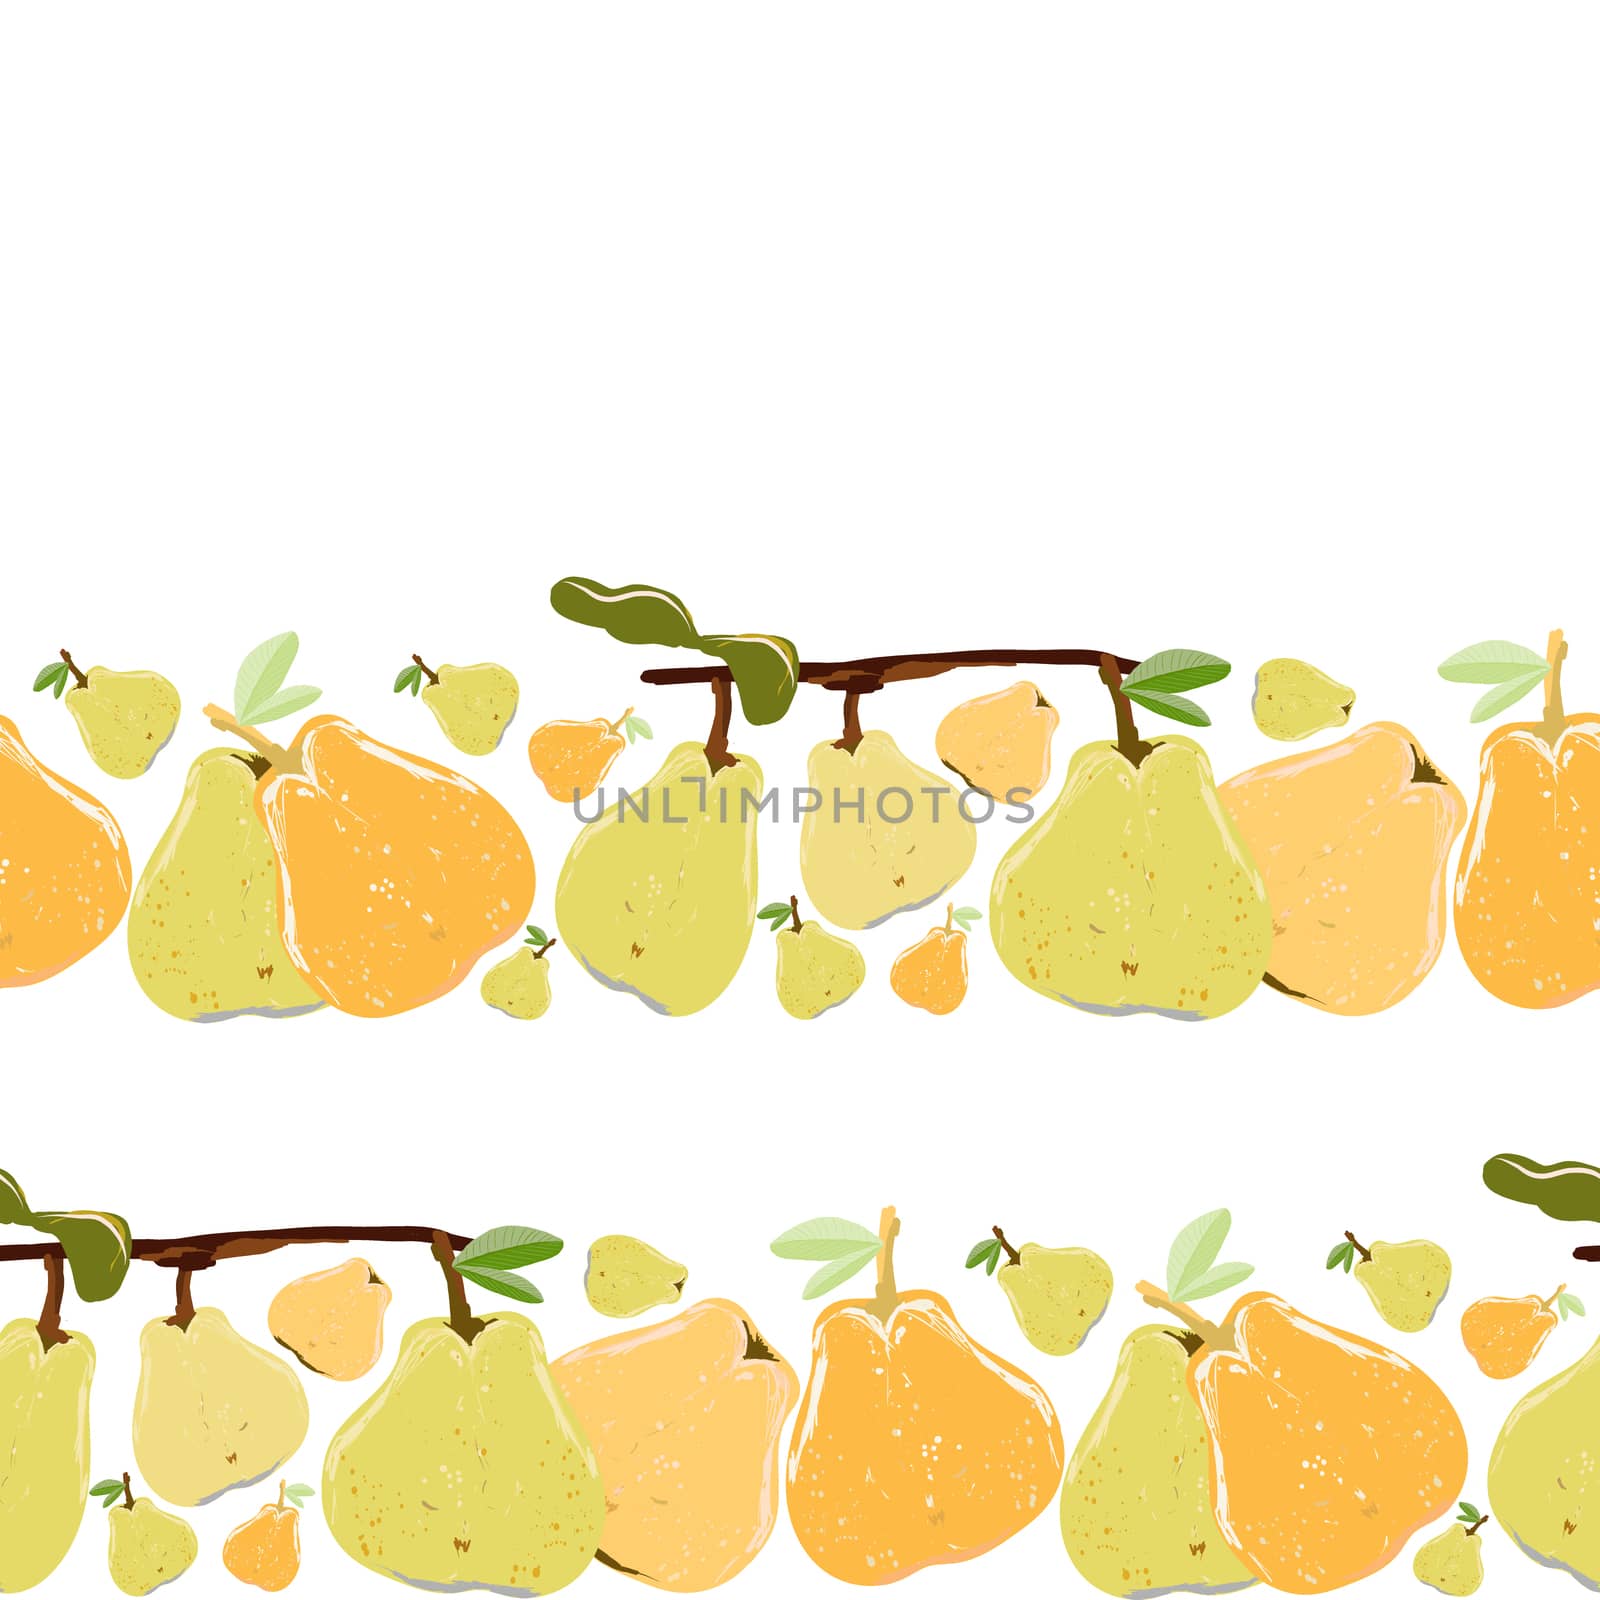 Yellow and orange pears whole with leaves seamless horizontal border on white background. by Nata_Prando